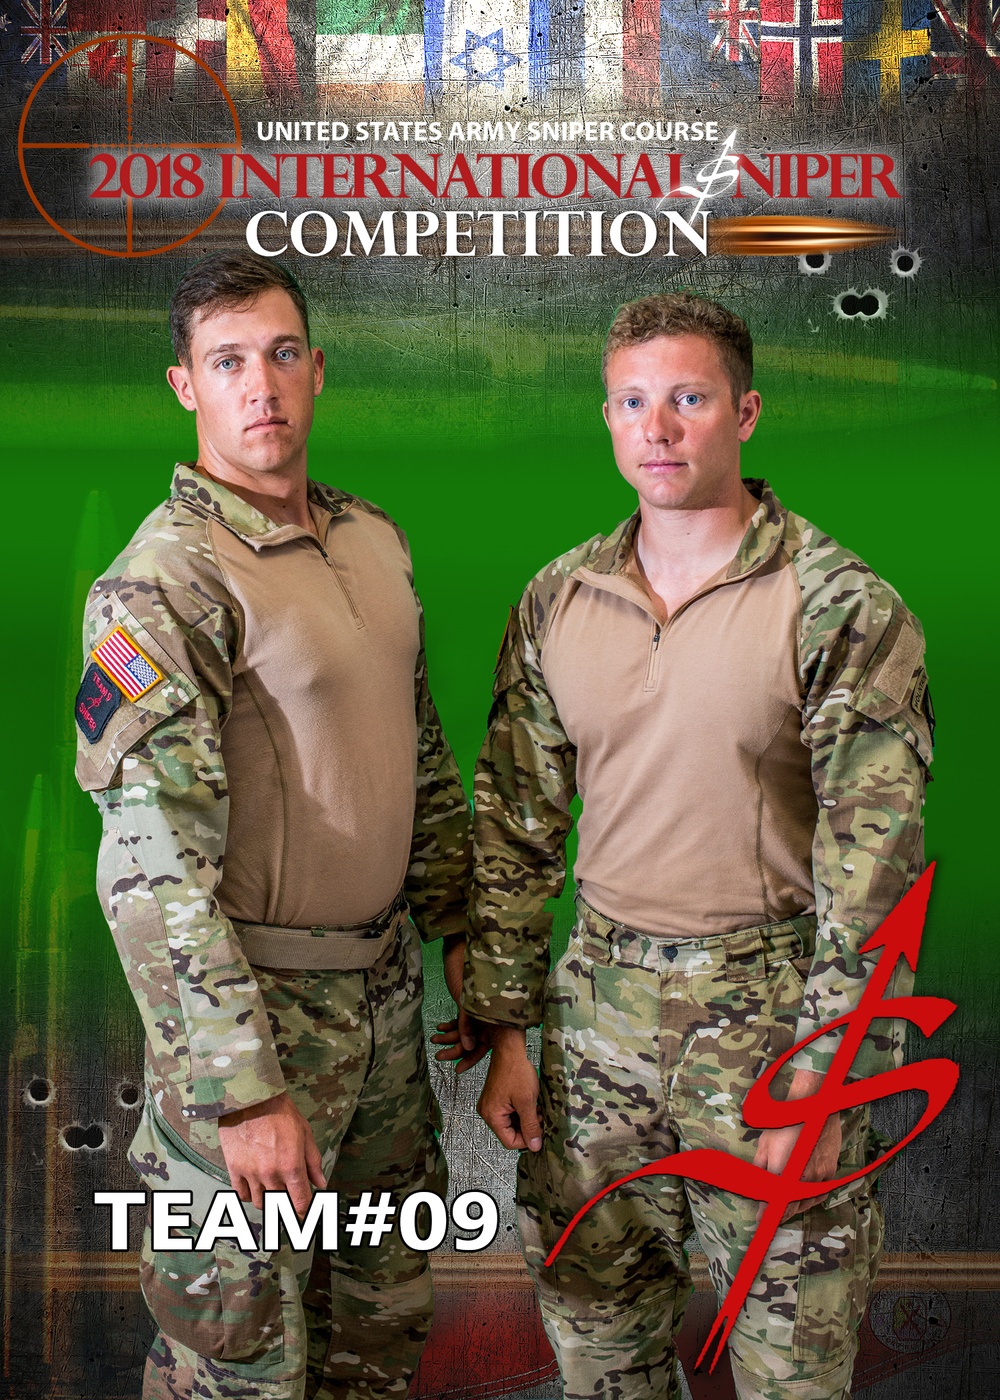 Second in the 2018 International Sniper Competition